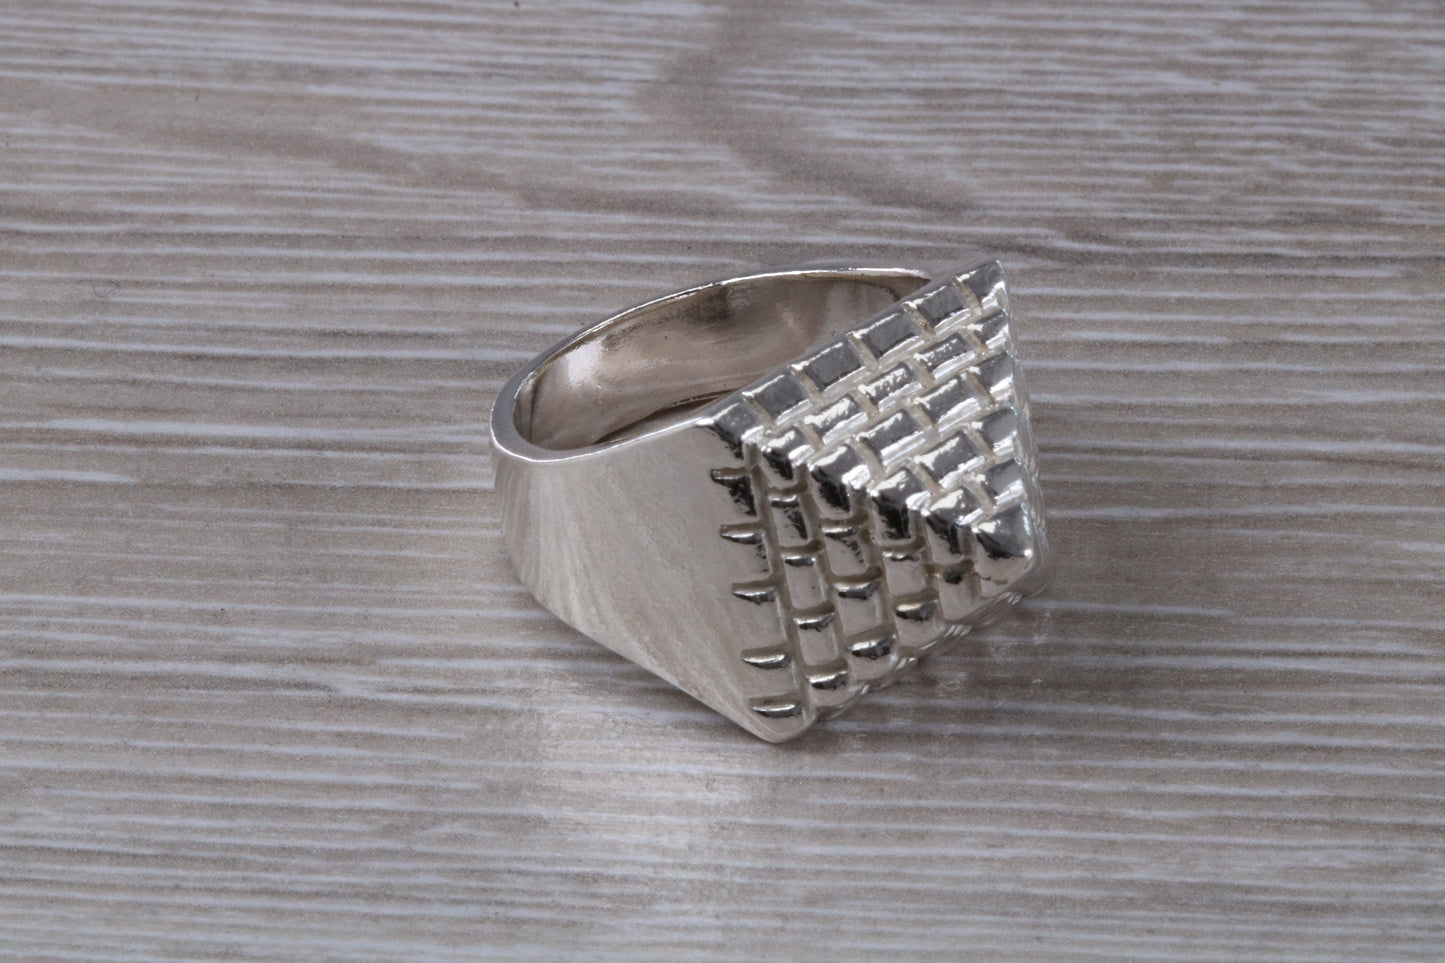 Large and very heavy Pyramid ring,solid silver, perfect for ladies and gents. Available in silver, yellow gold, white gold and platinum